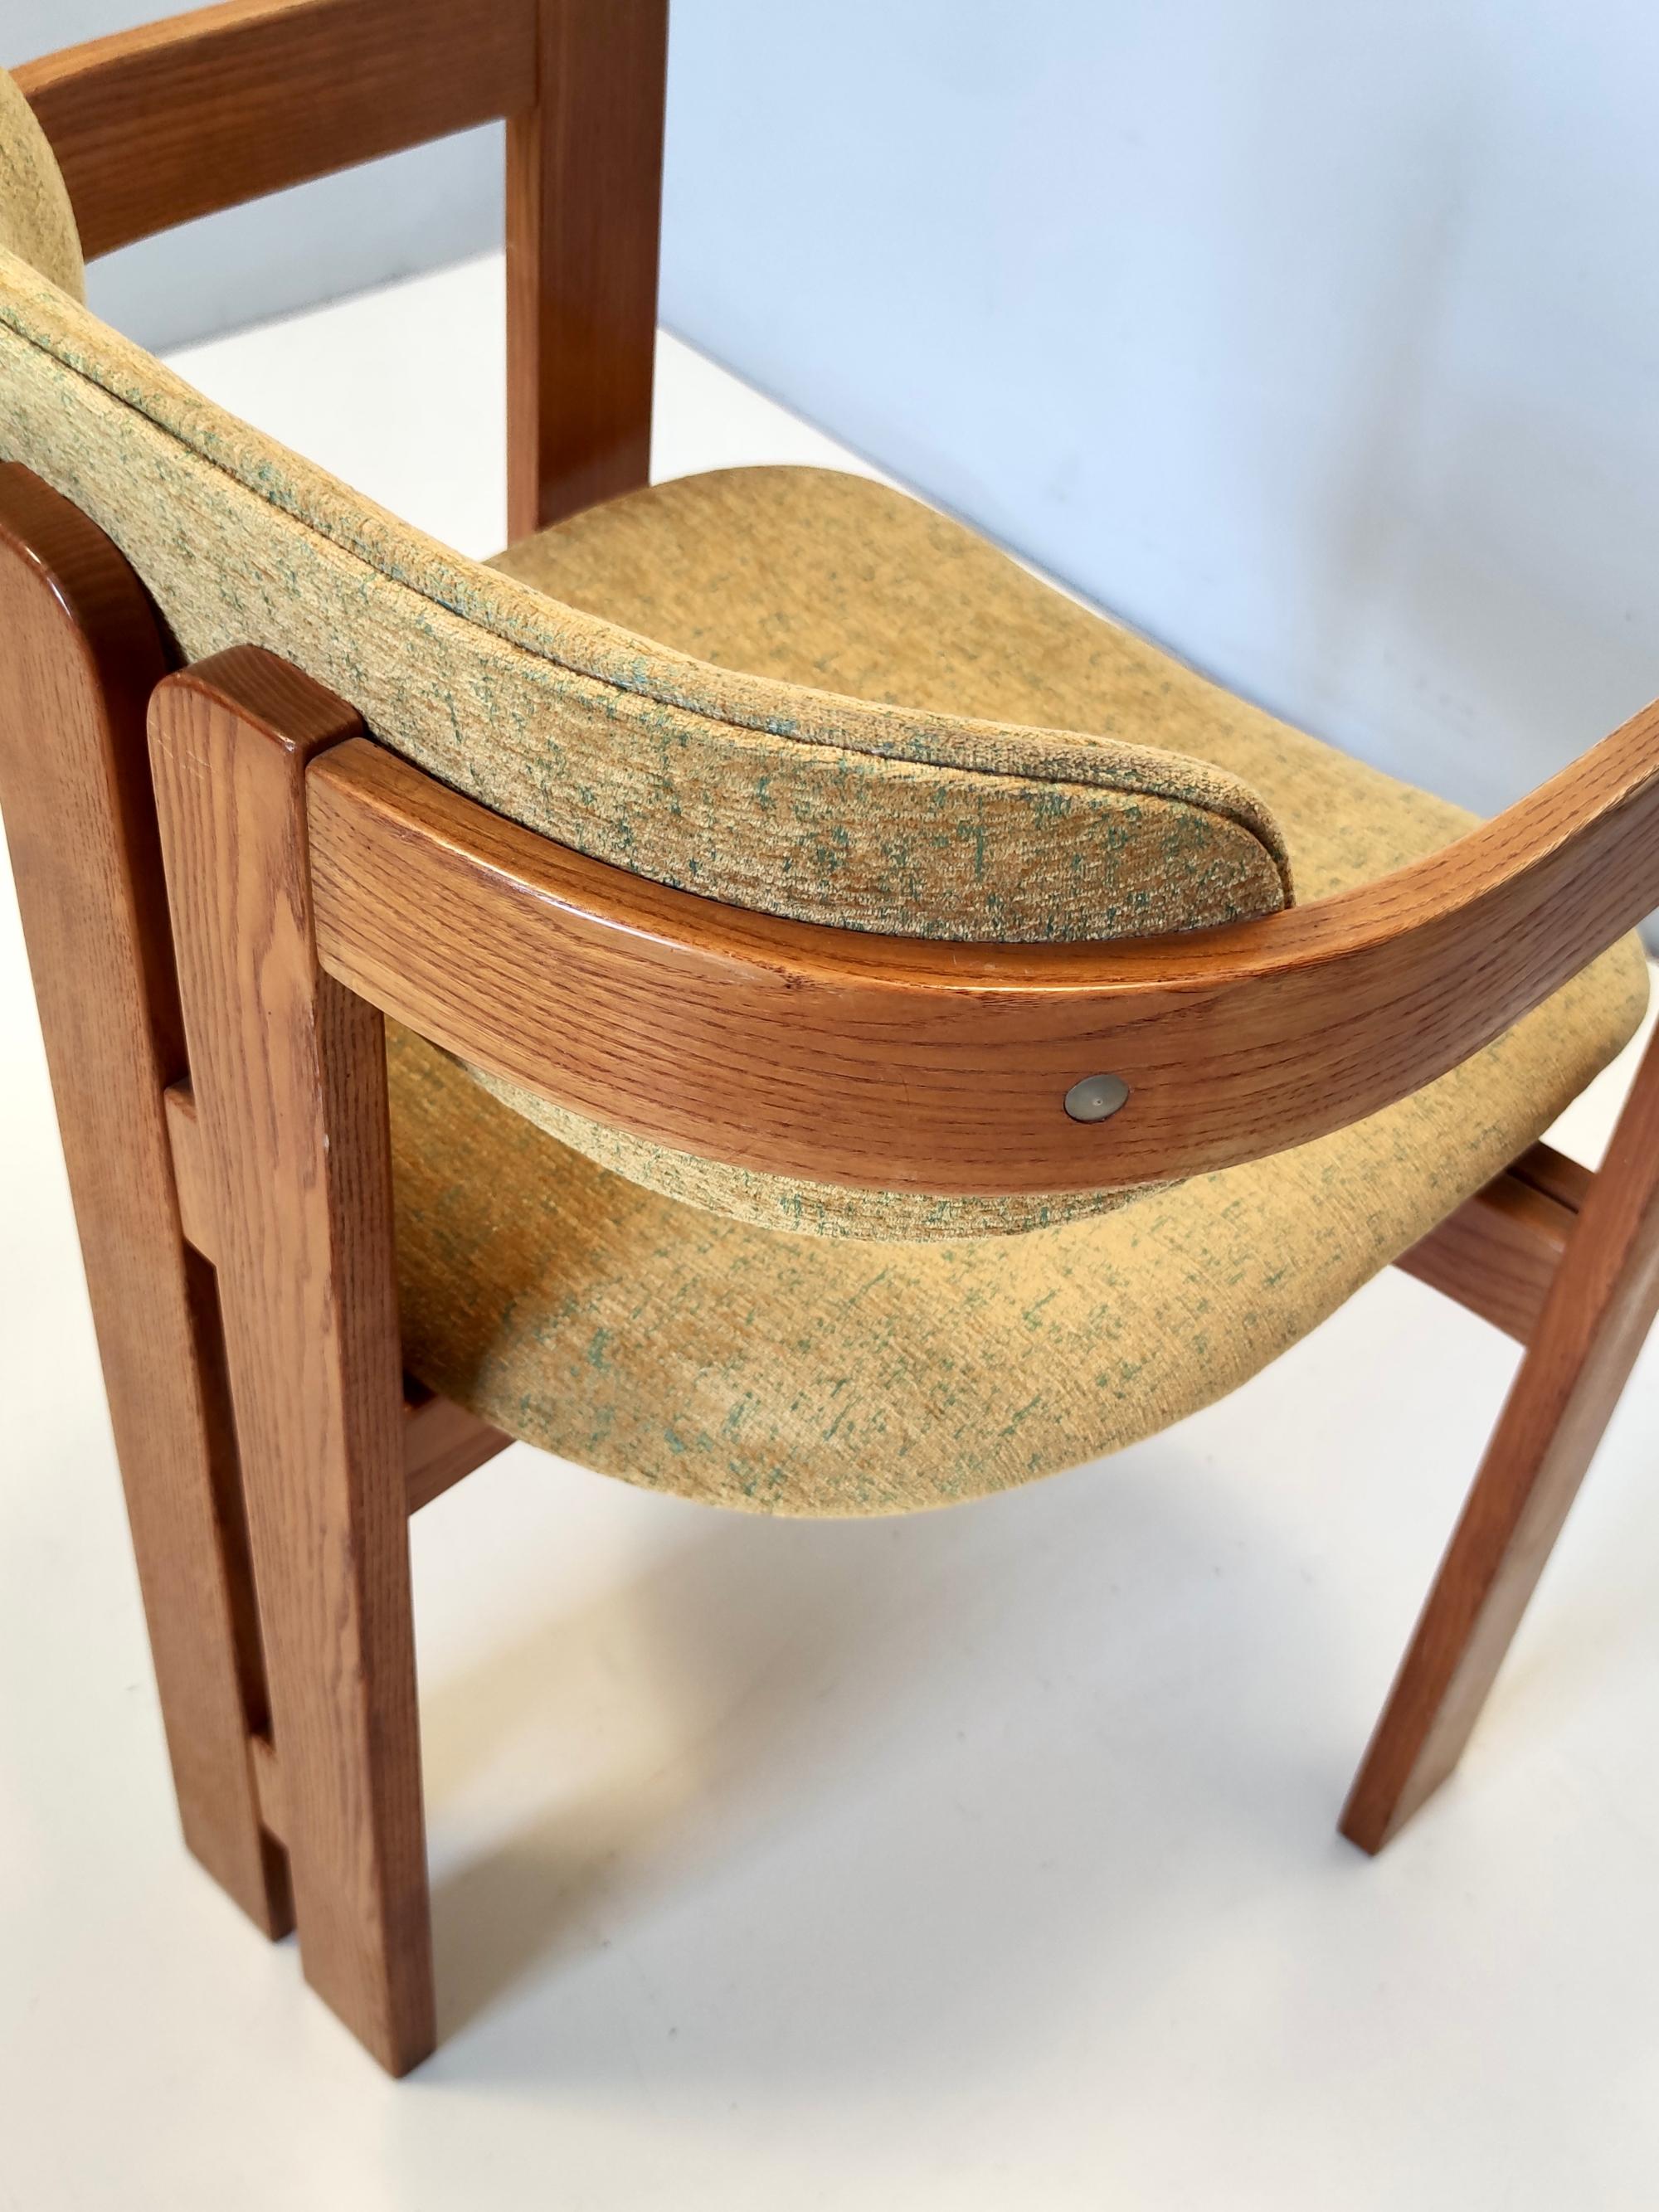 Pigreco Chair in the style of Tobia Scarpa for Gavina with Yellow Upholstery 2